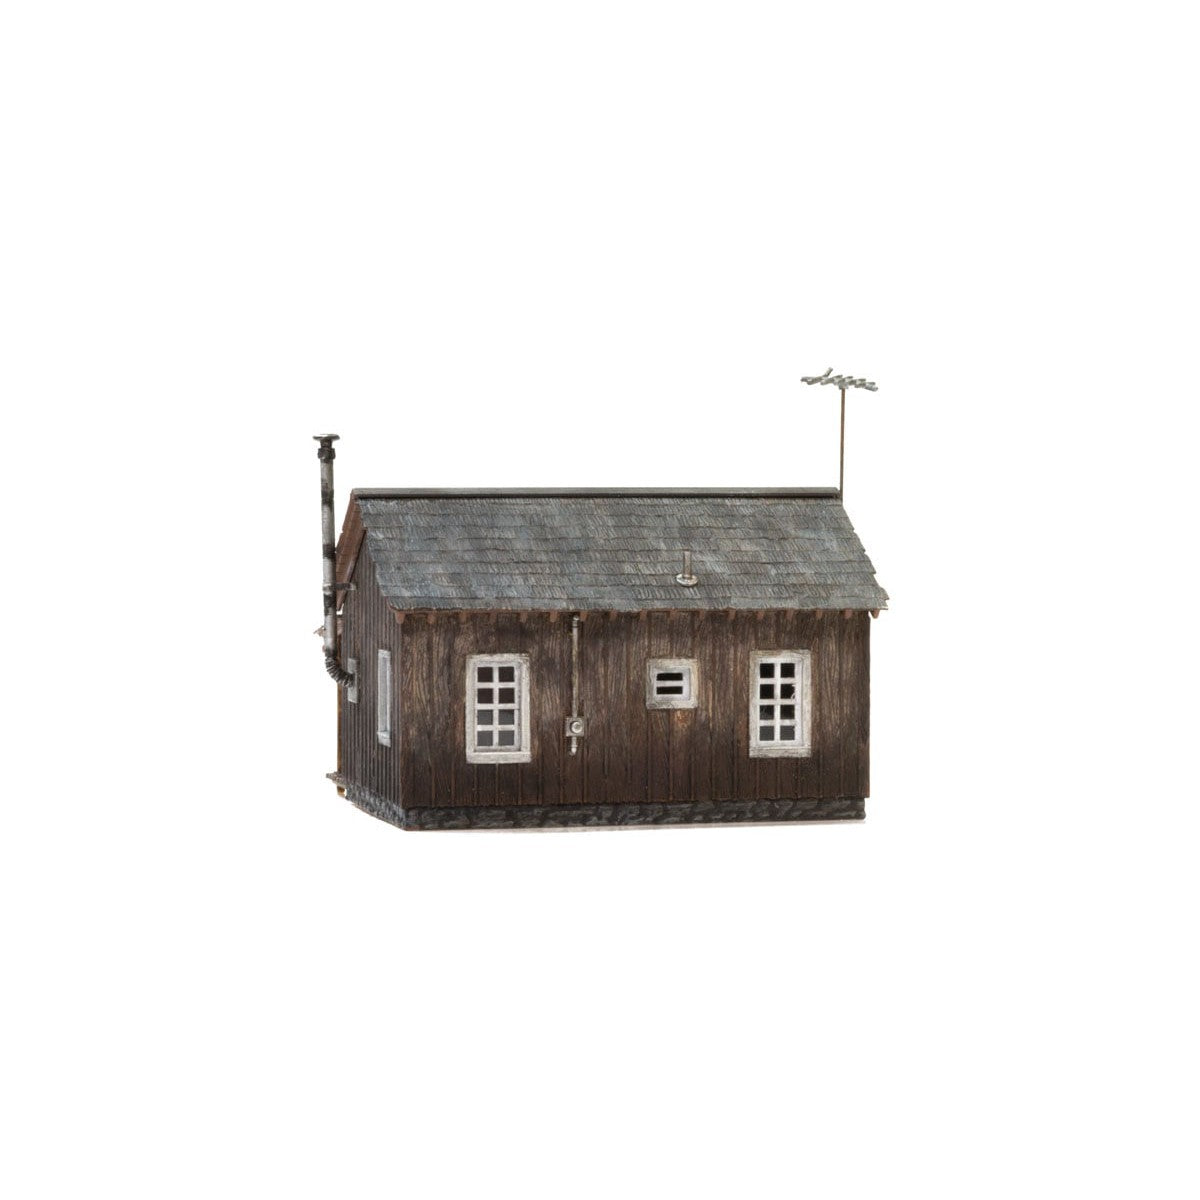 Woodland Scenics N Scale Rustic Cabin (Lit) Built and Ready